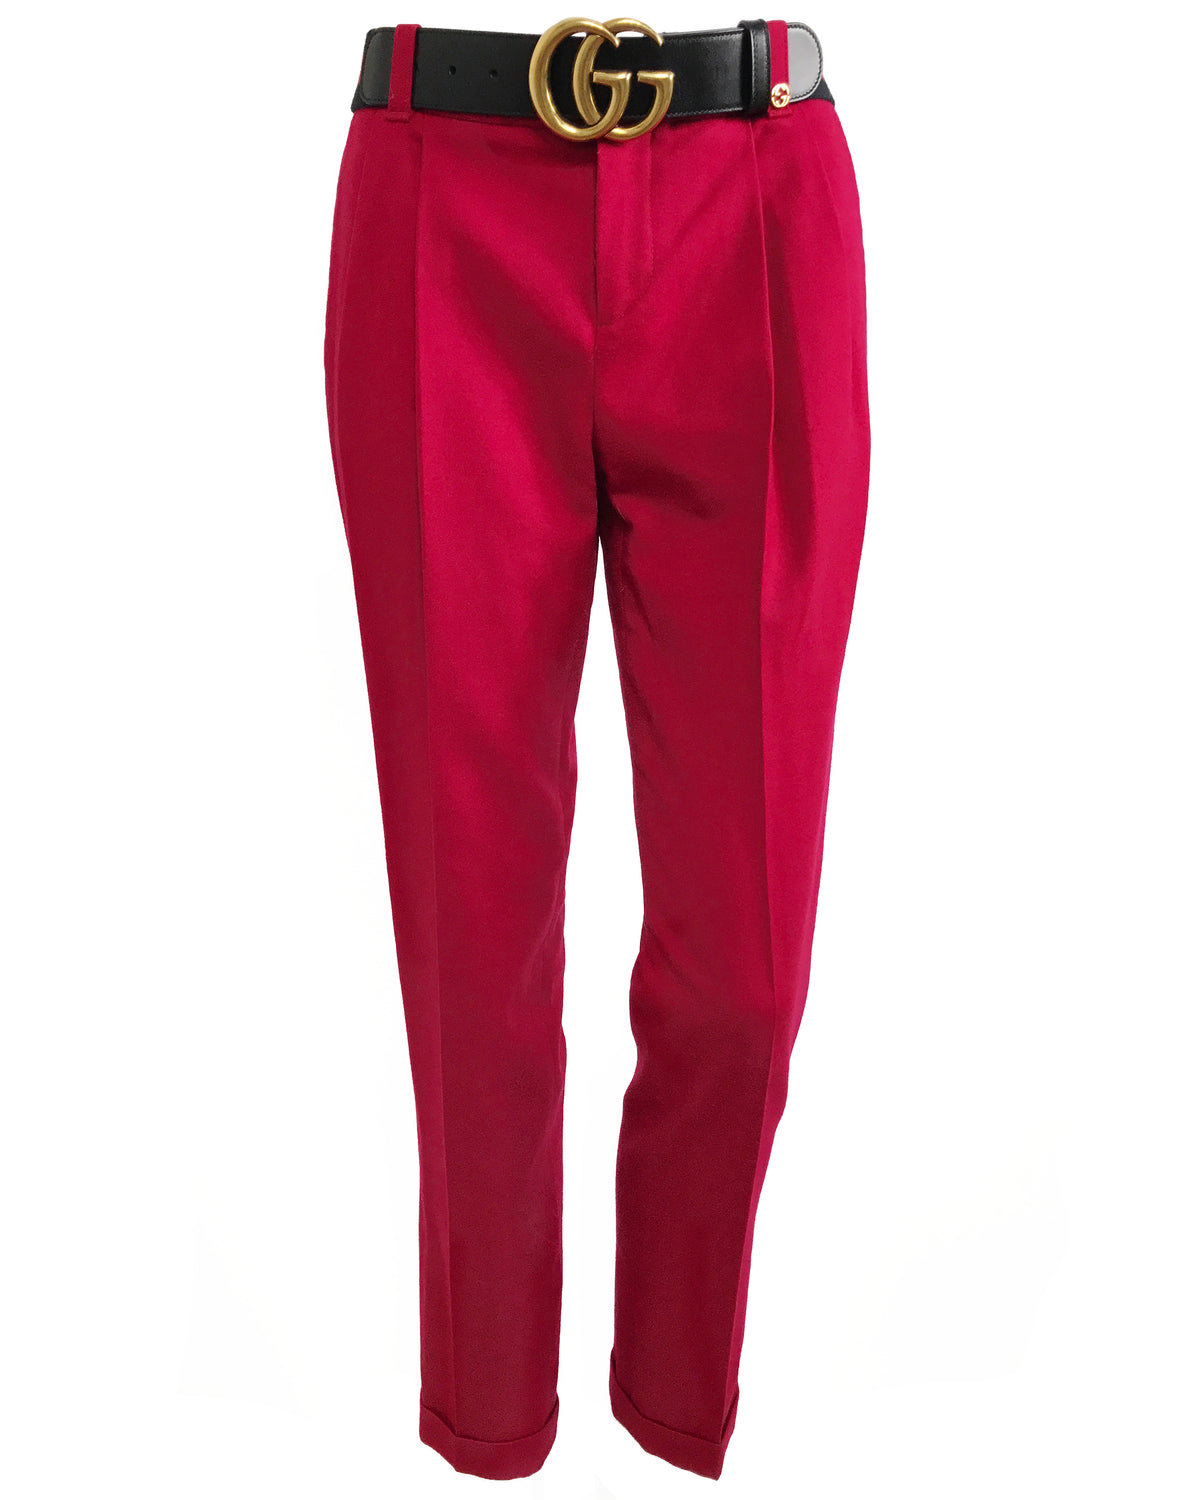 FRUIT Vintage Gucci Red Tailored Wool Pants